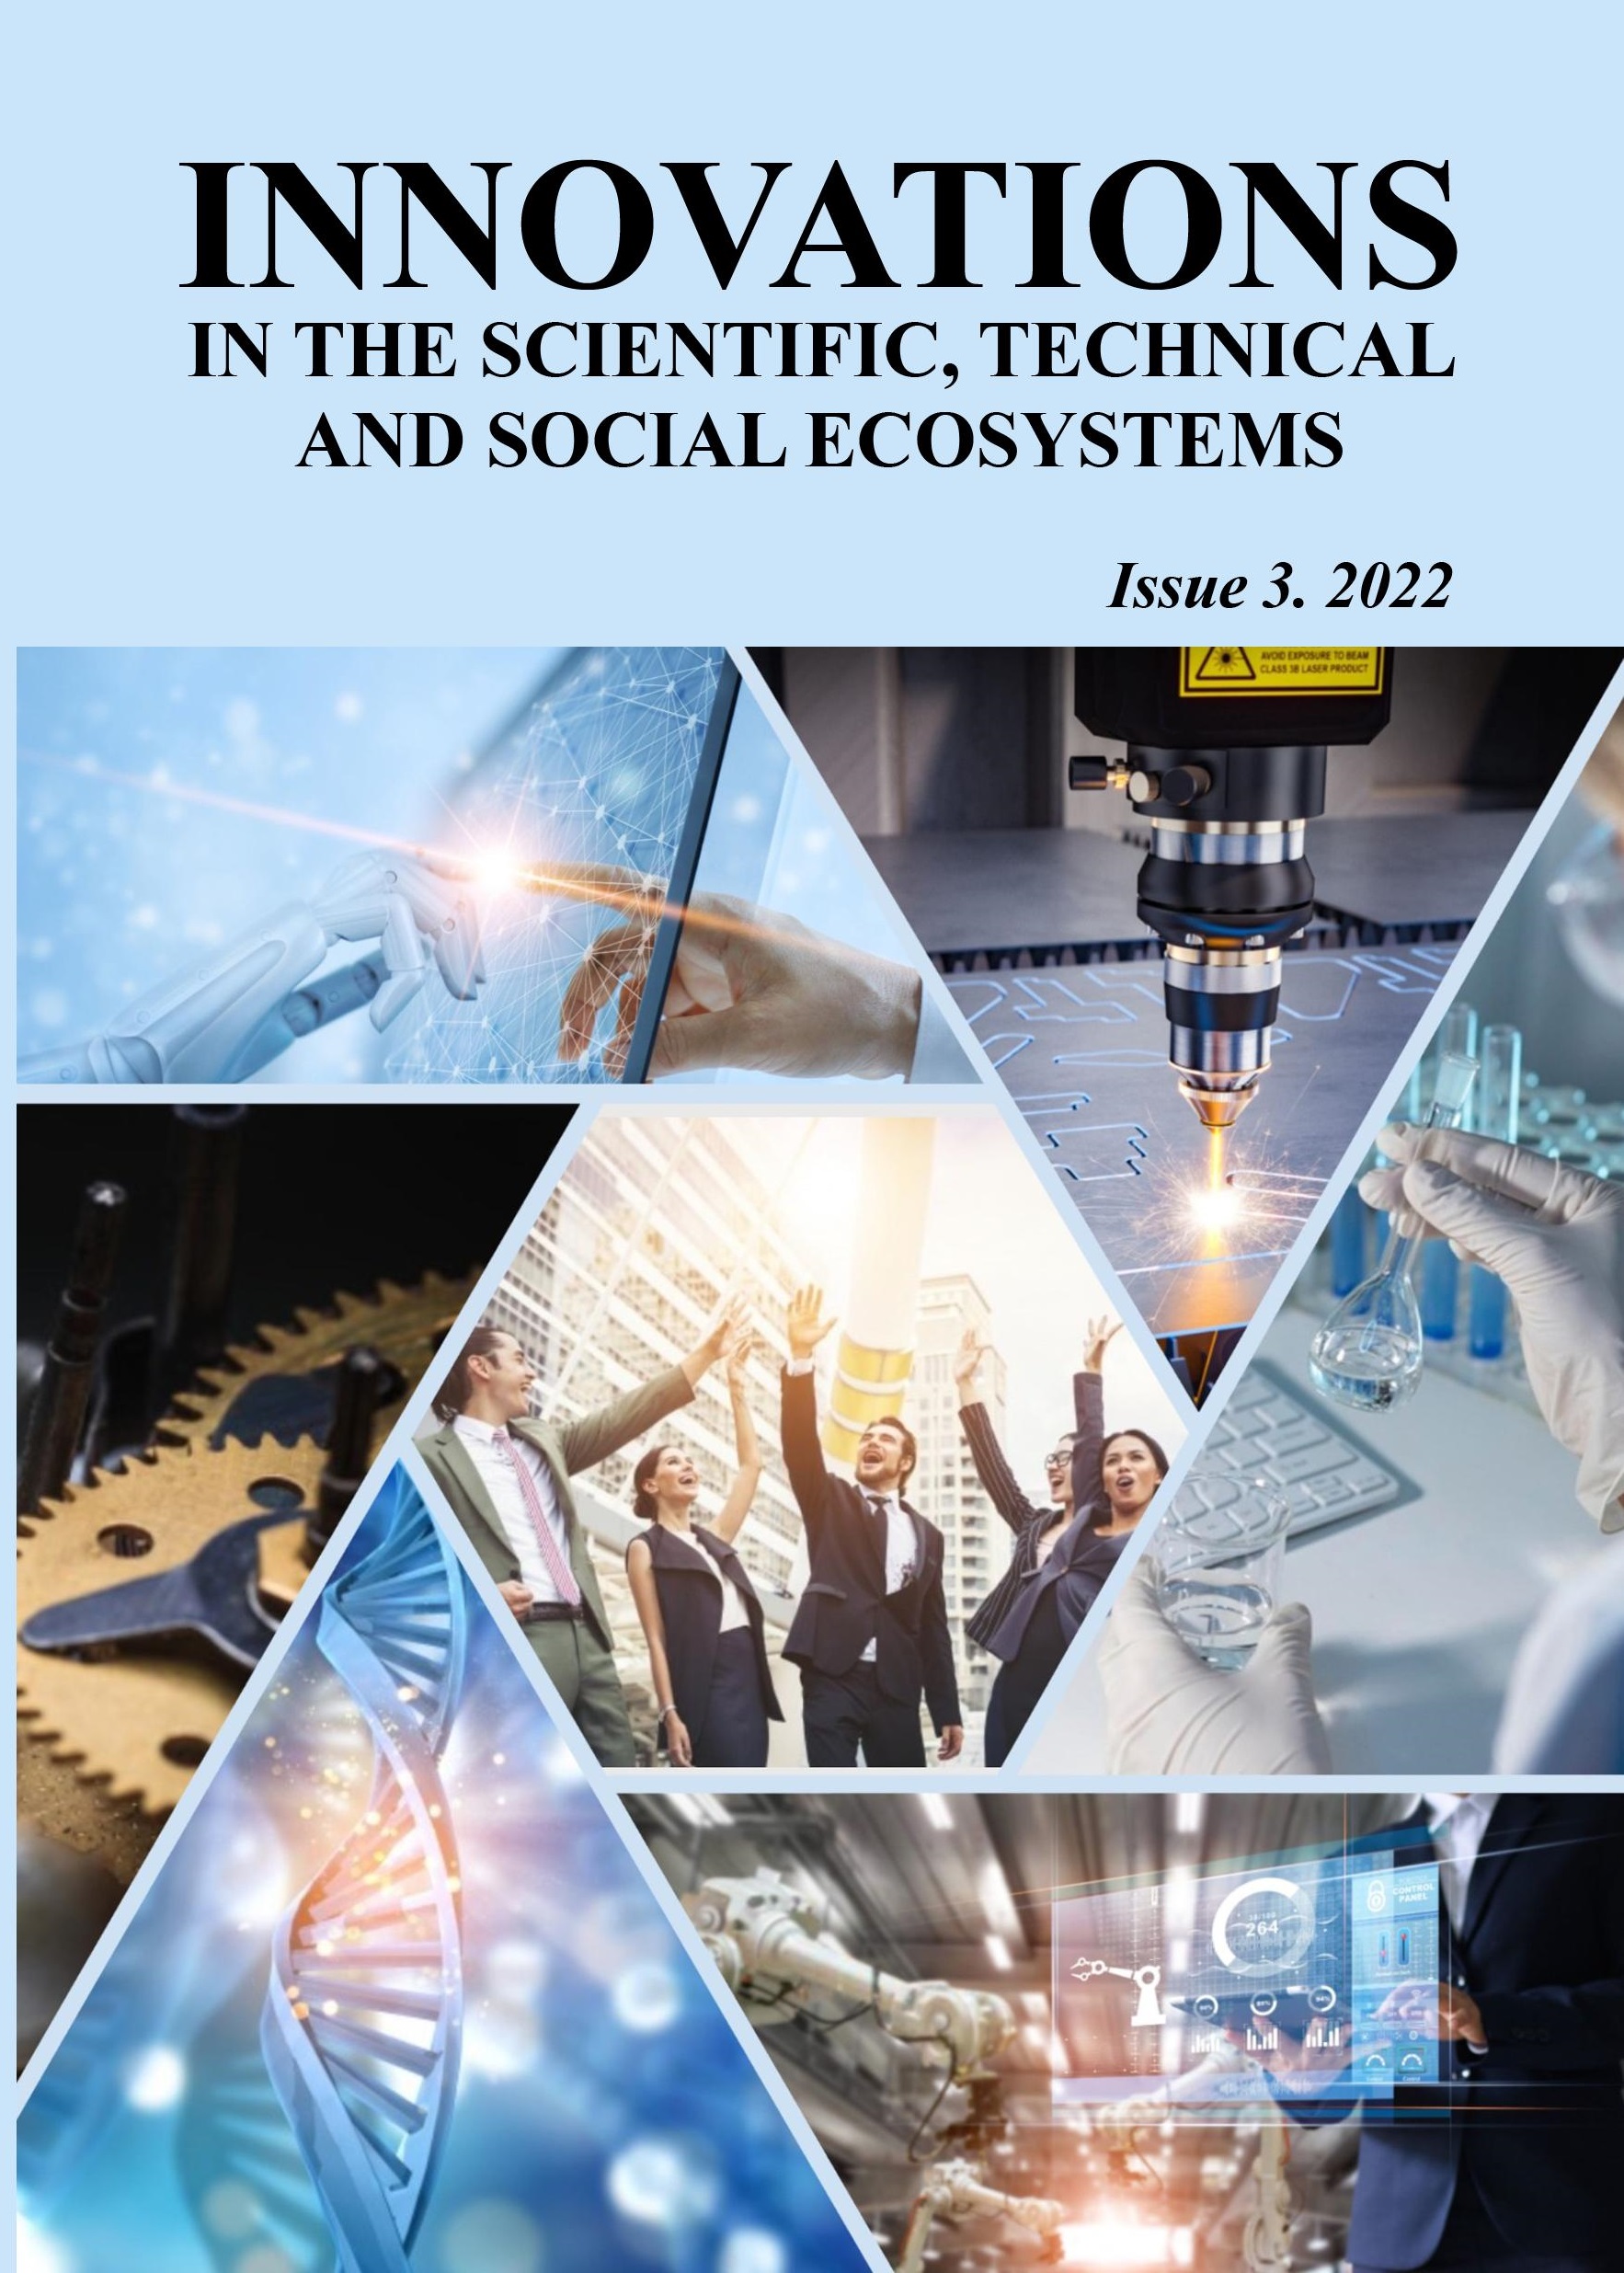 					View Vol. 1 No. 3 (2022): INNOVATIONS IN THE SCIENTIFIC, TECHNICAL AND SOCIAL ECOSYSTEMS
				